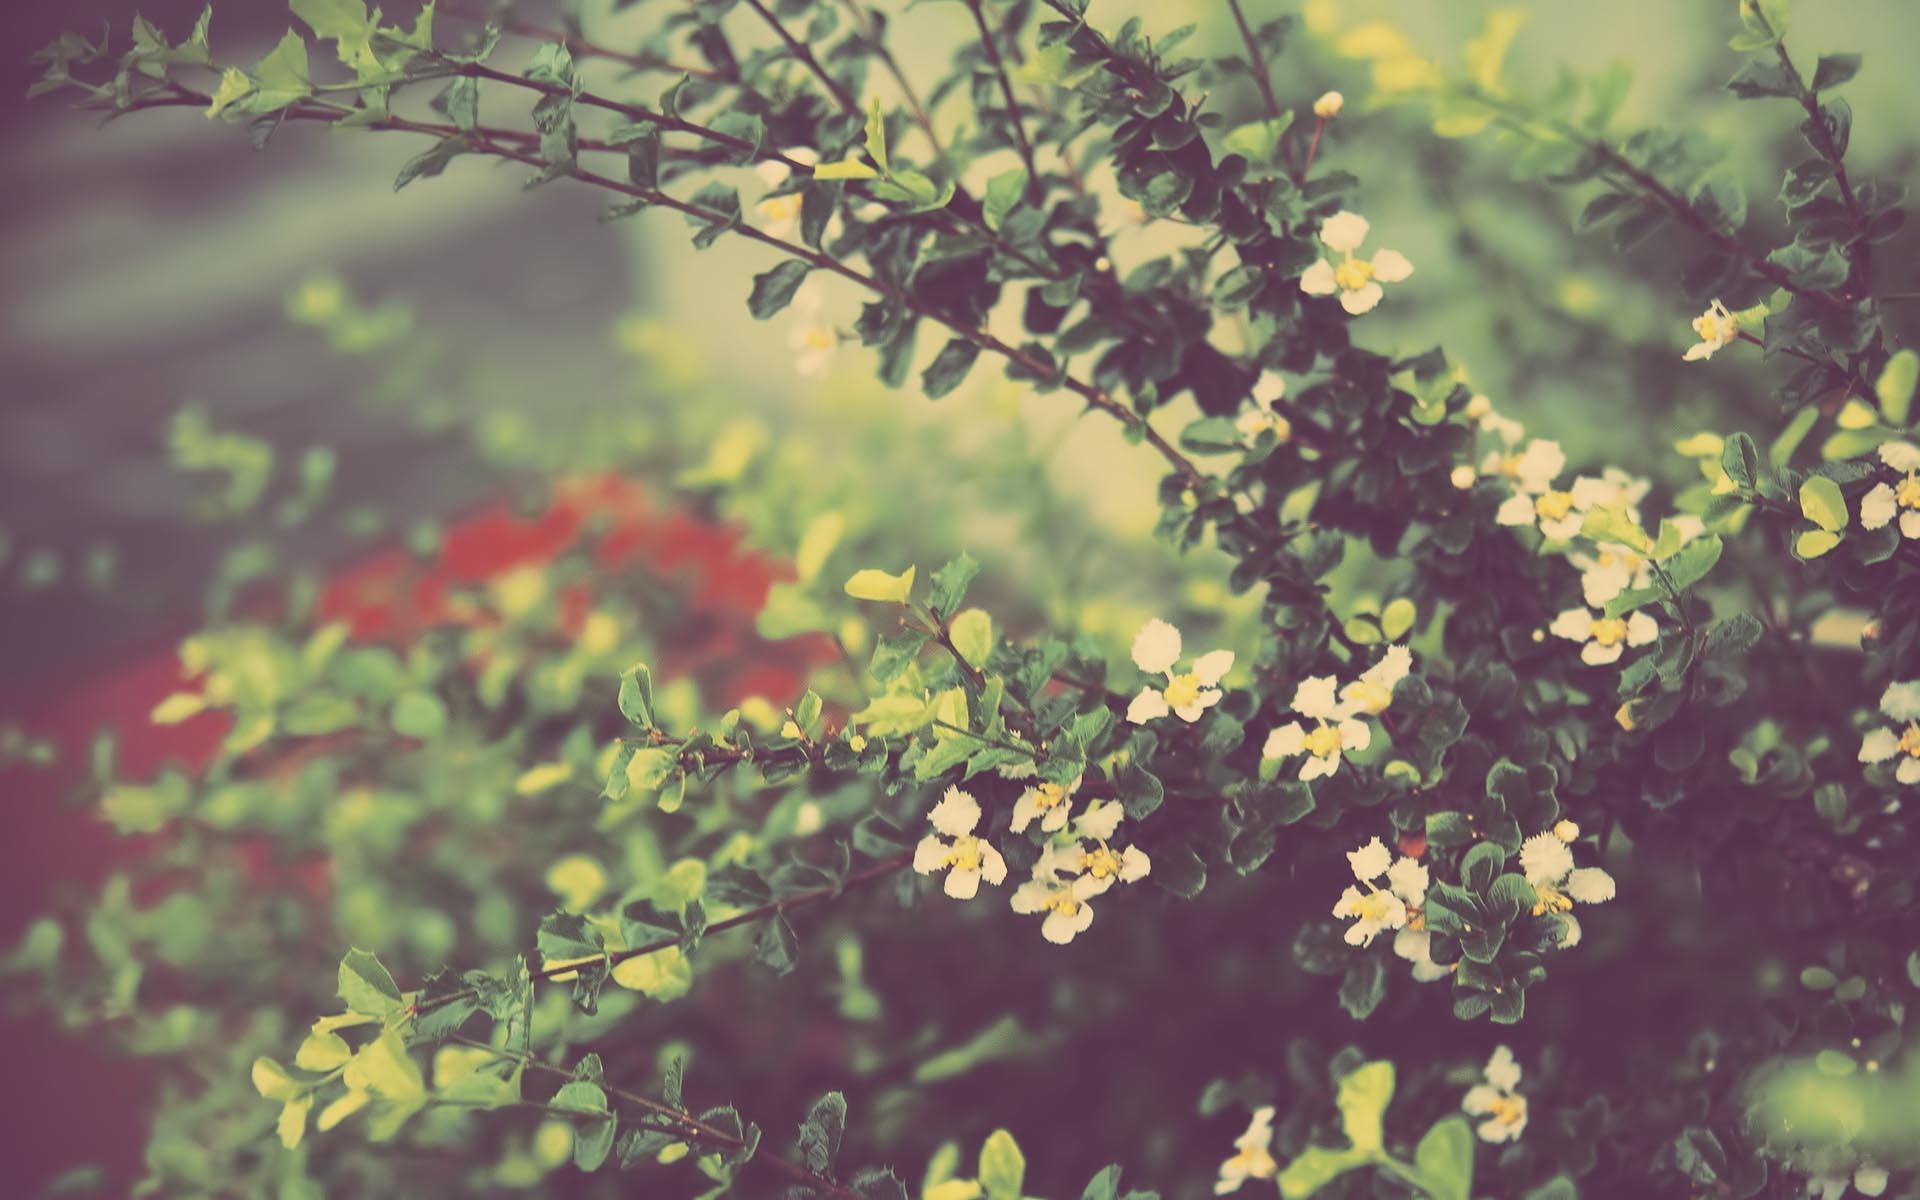 General 1920x1200 flowers blurred outdoors plants